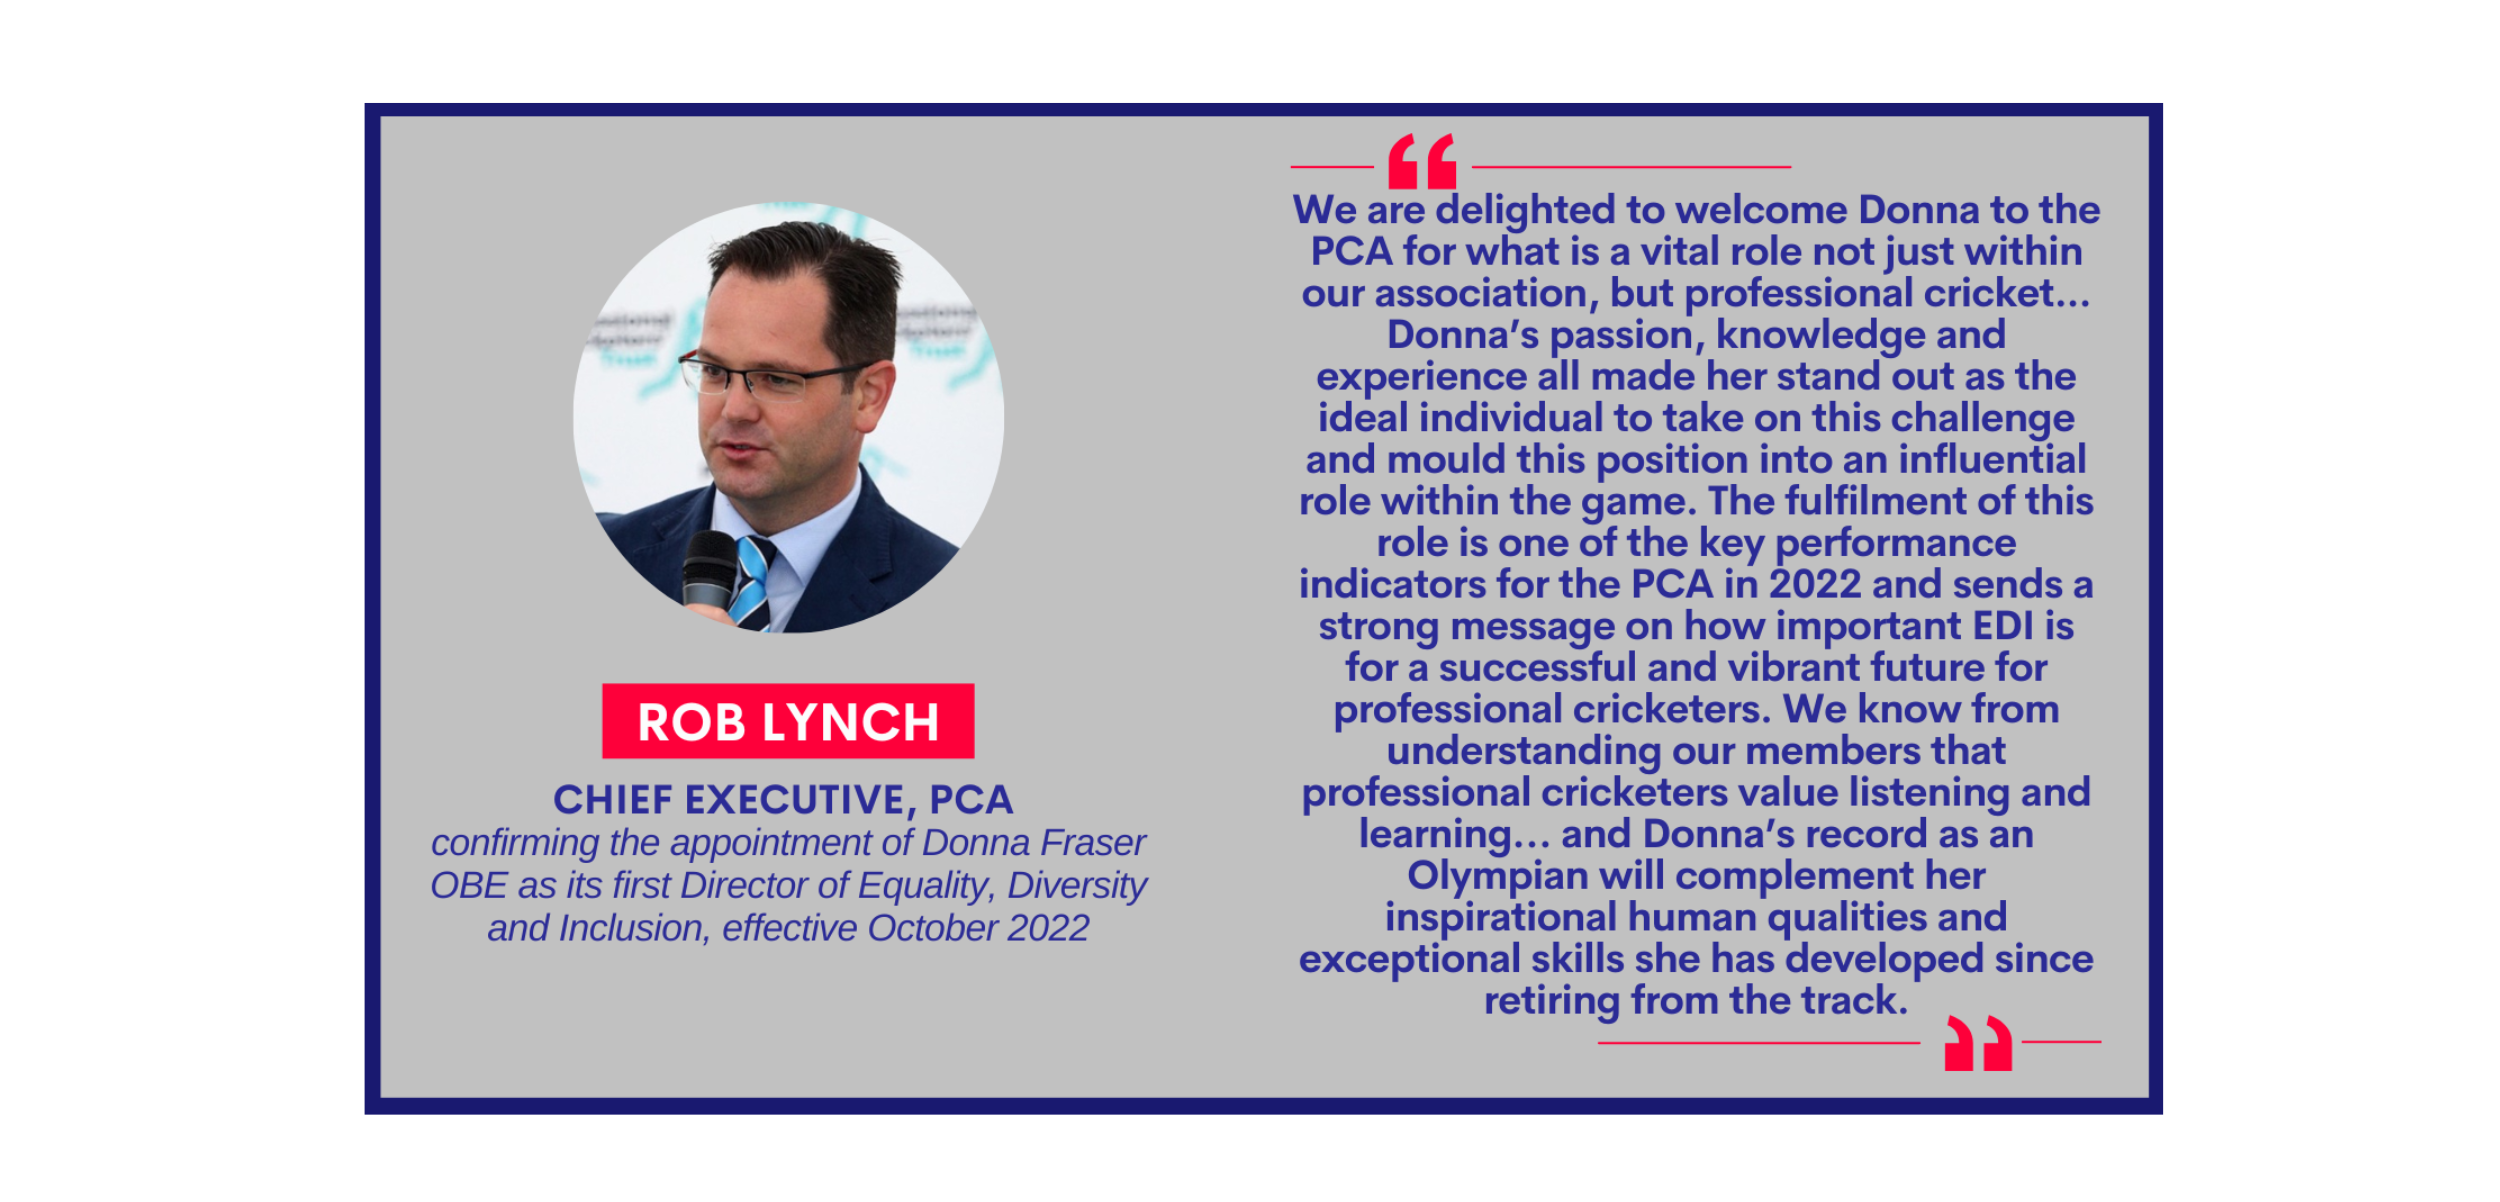 Rob Lynch, Chief Executive, PCA on September 27, 2022